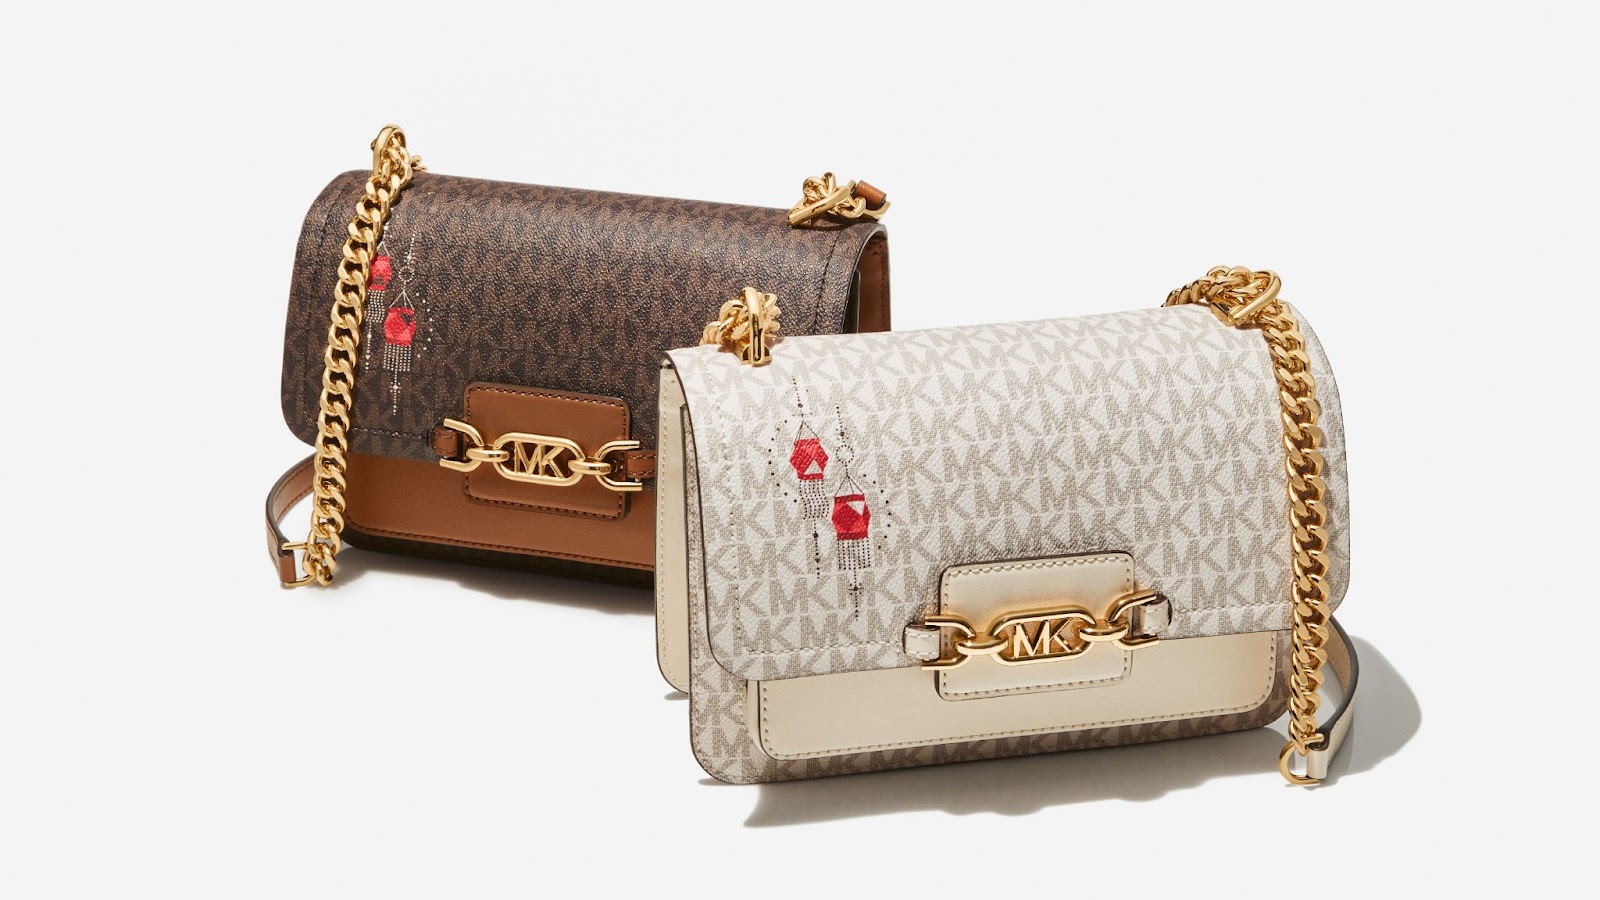 MICHAEL KORS INTRODUCES THE EXCLUSIVE INDIA CAPSULE COLLECTION